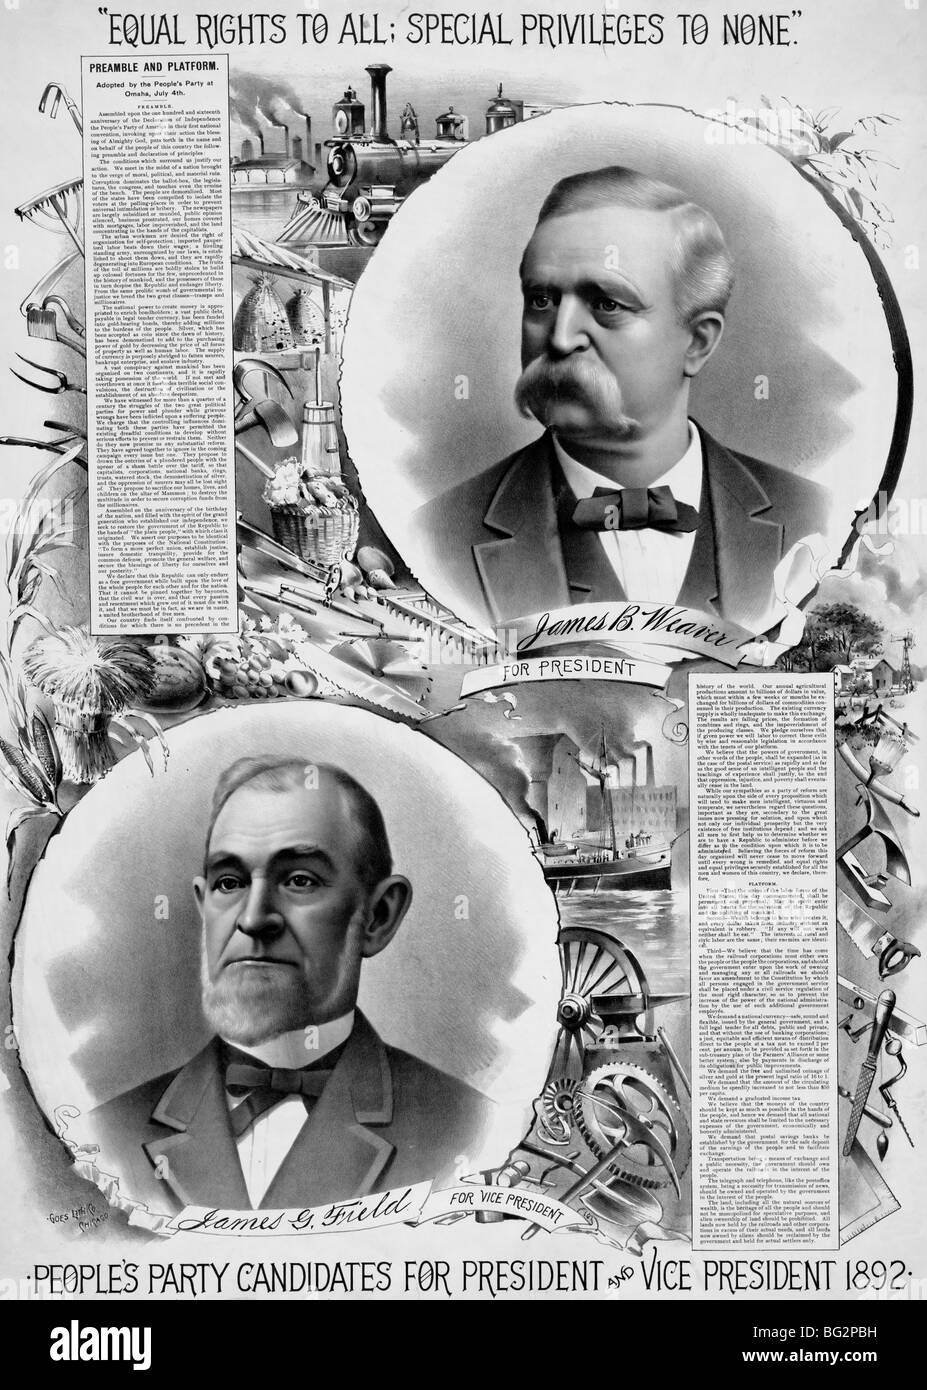 James Weaver and James Field - People's party candidates for president and vice president 1892, USA Stock Photo